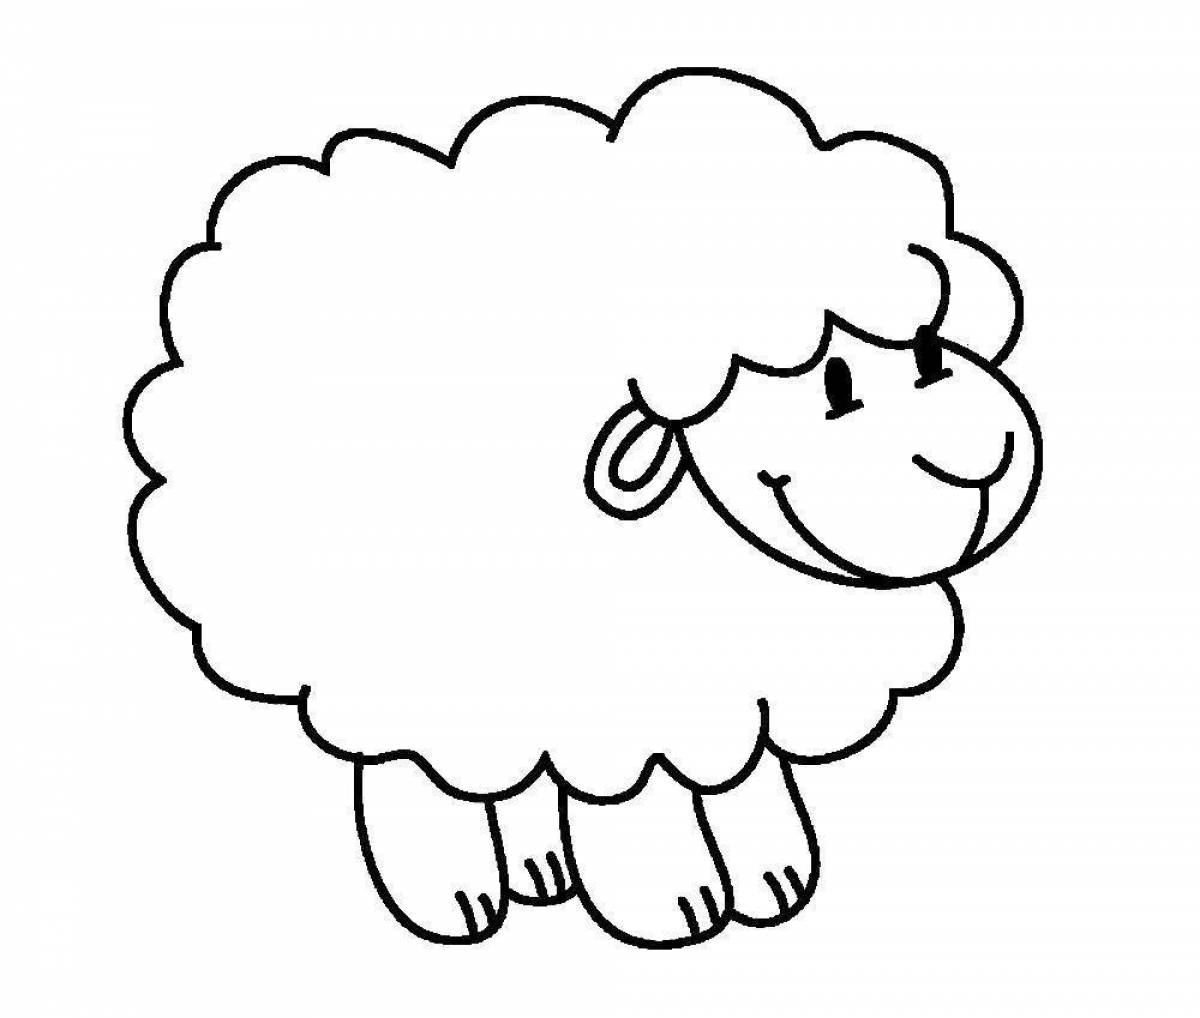 Live sheep coloring book for kids